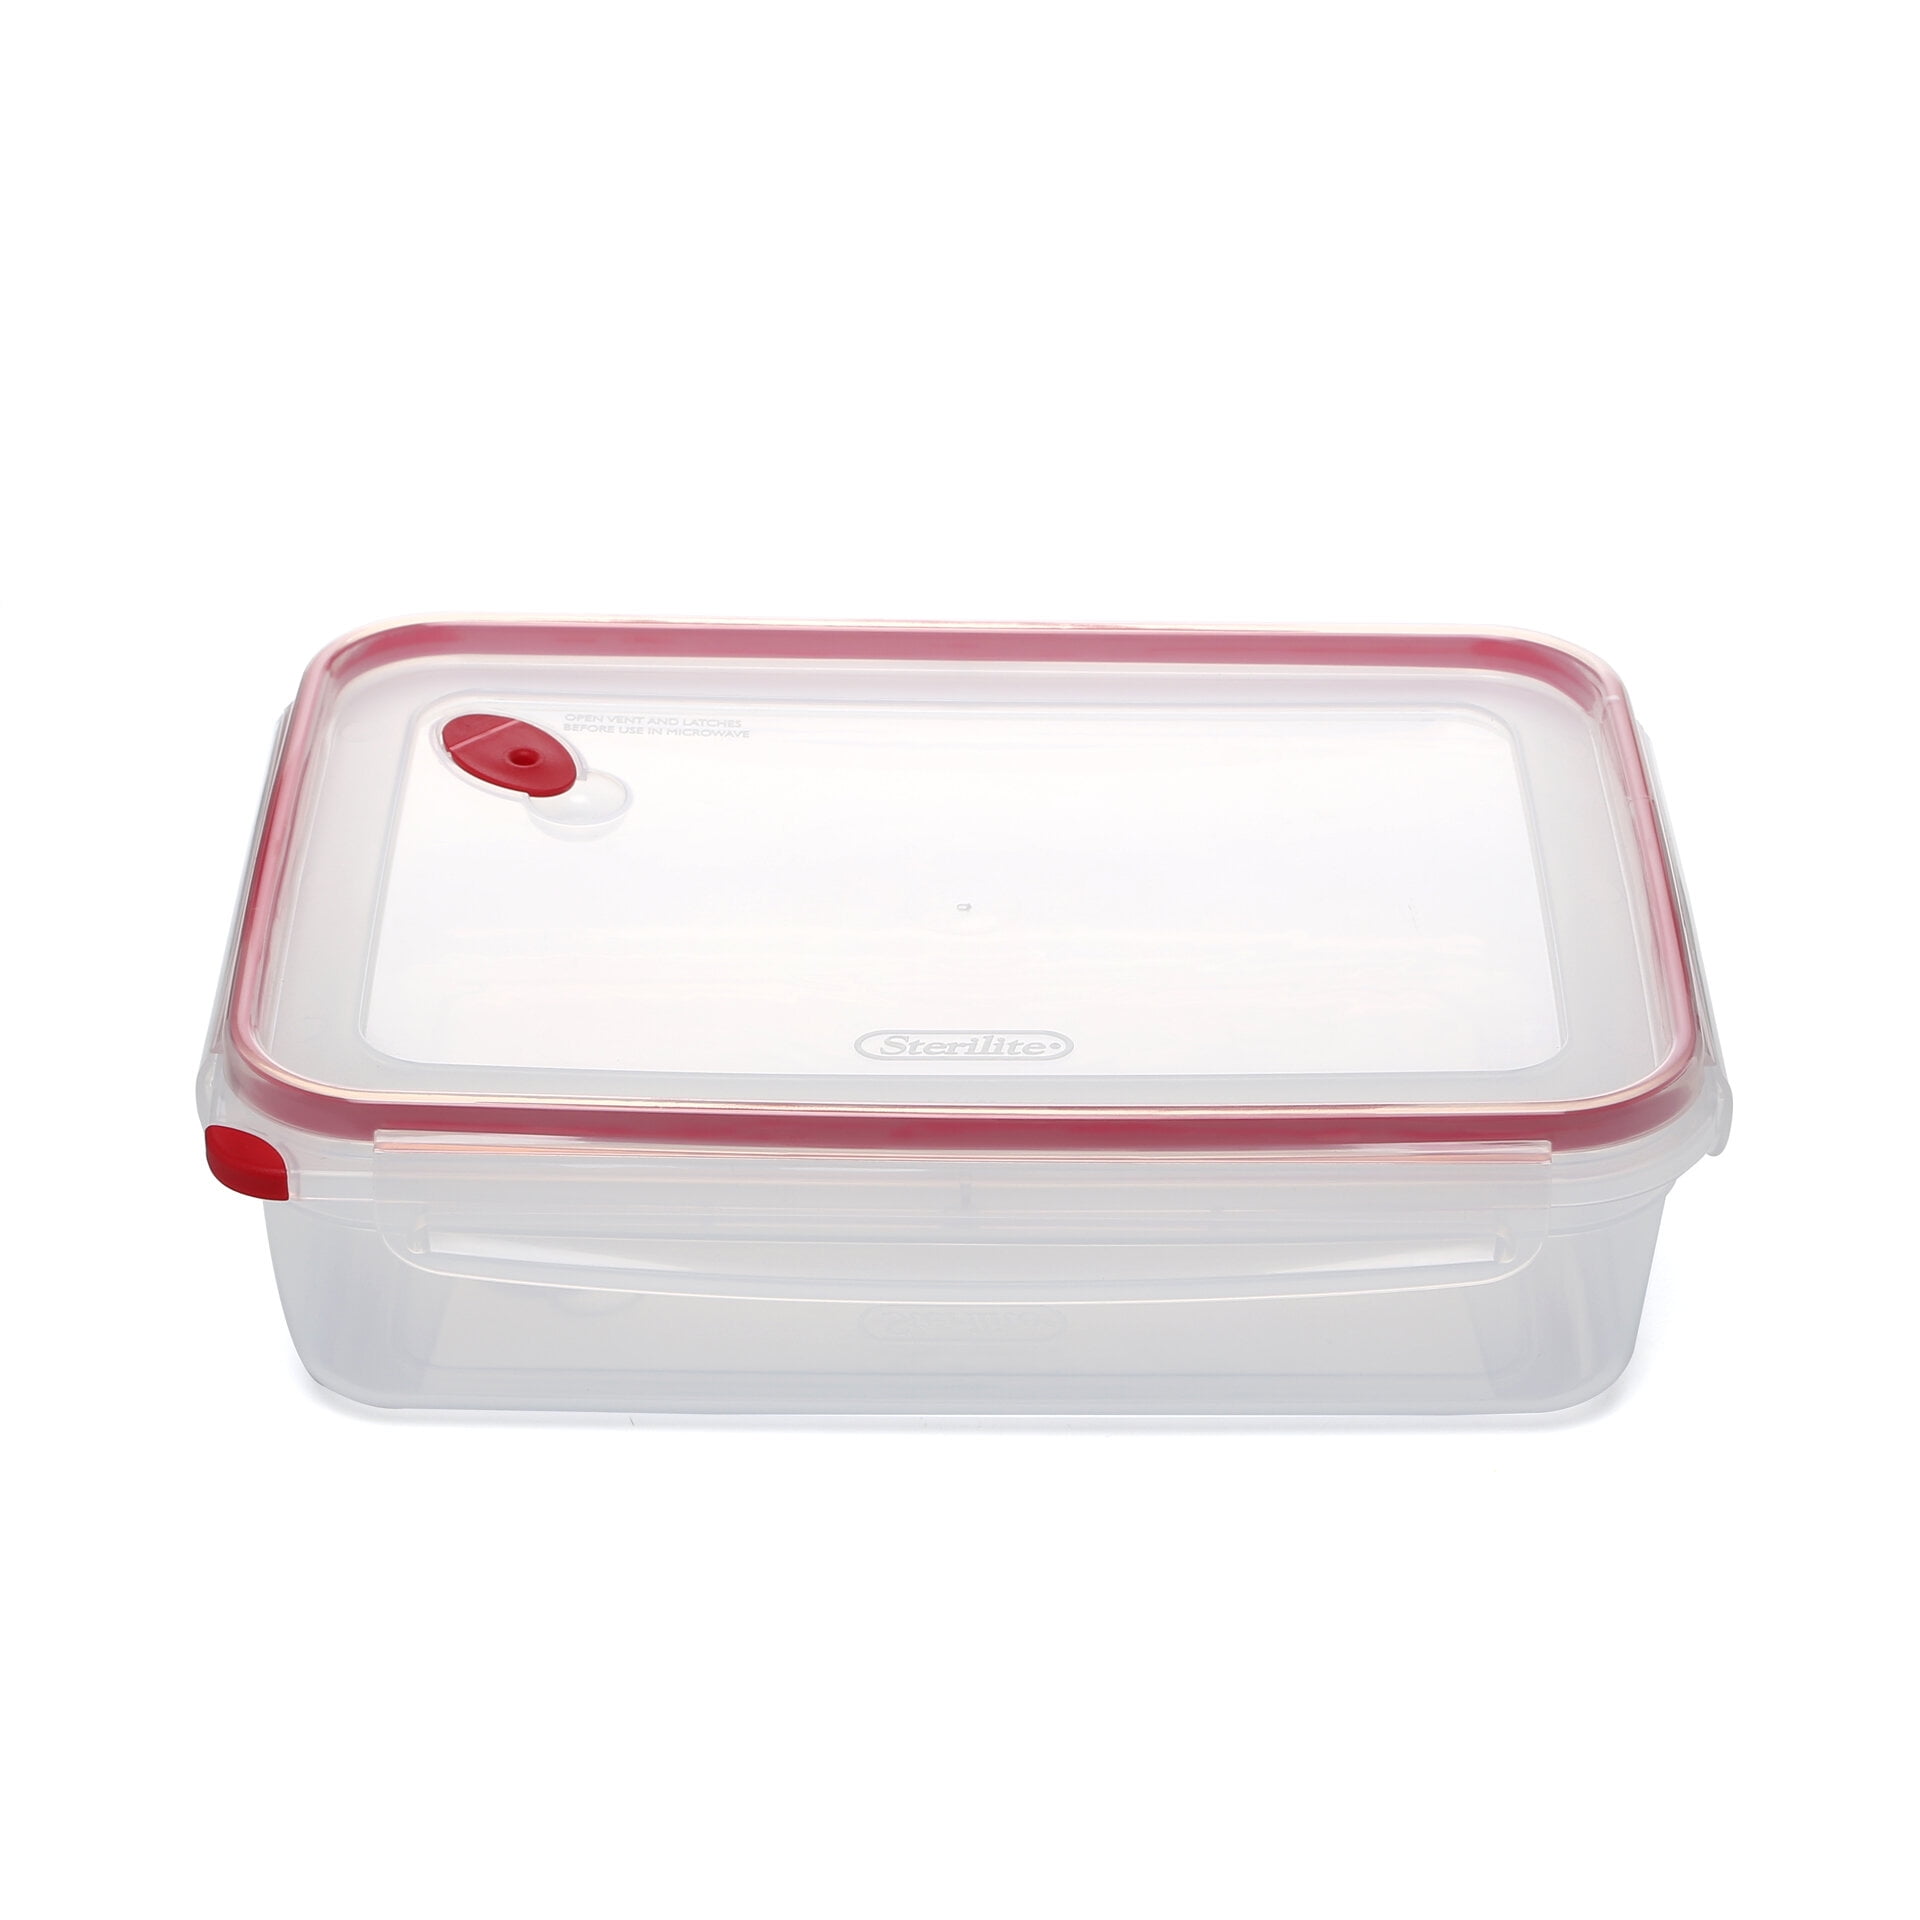 Sterilite 0 Ultra-Seal 16 Cup Food Storage Container, See-Through Lid &  Base with Rocket Red Accents, 4-Pack